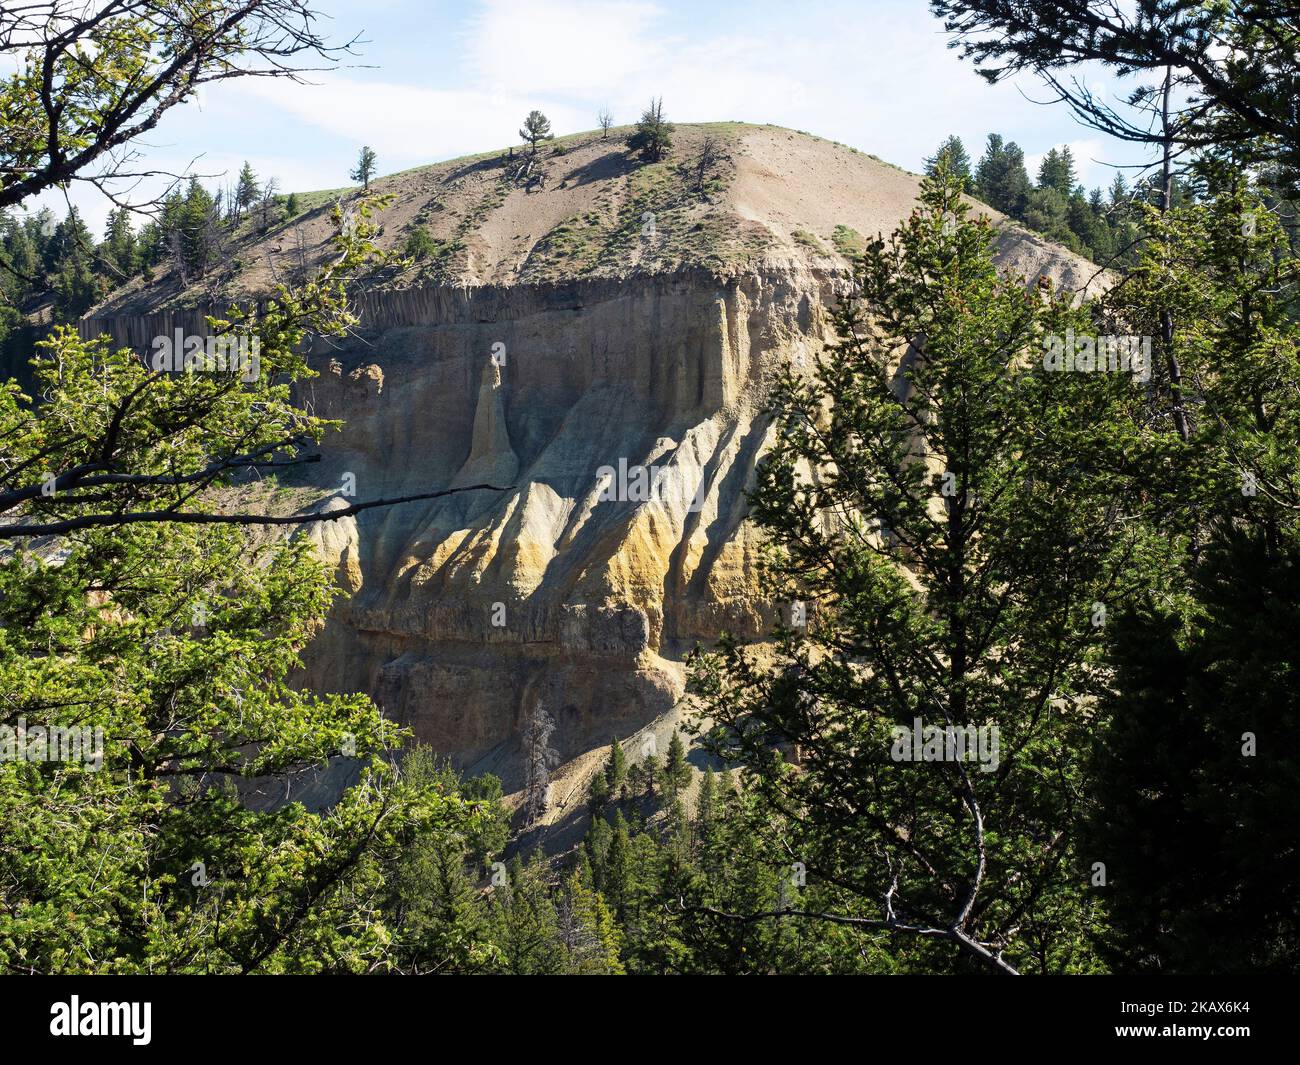 Rounded hill and eroded cliff close to Tower Falls viewed through coniferous forest, Yellowstone National Park, Wyoming, USA, June 2019 Stock Photo